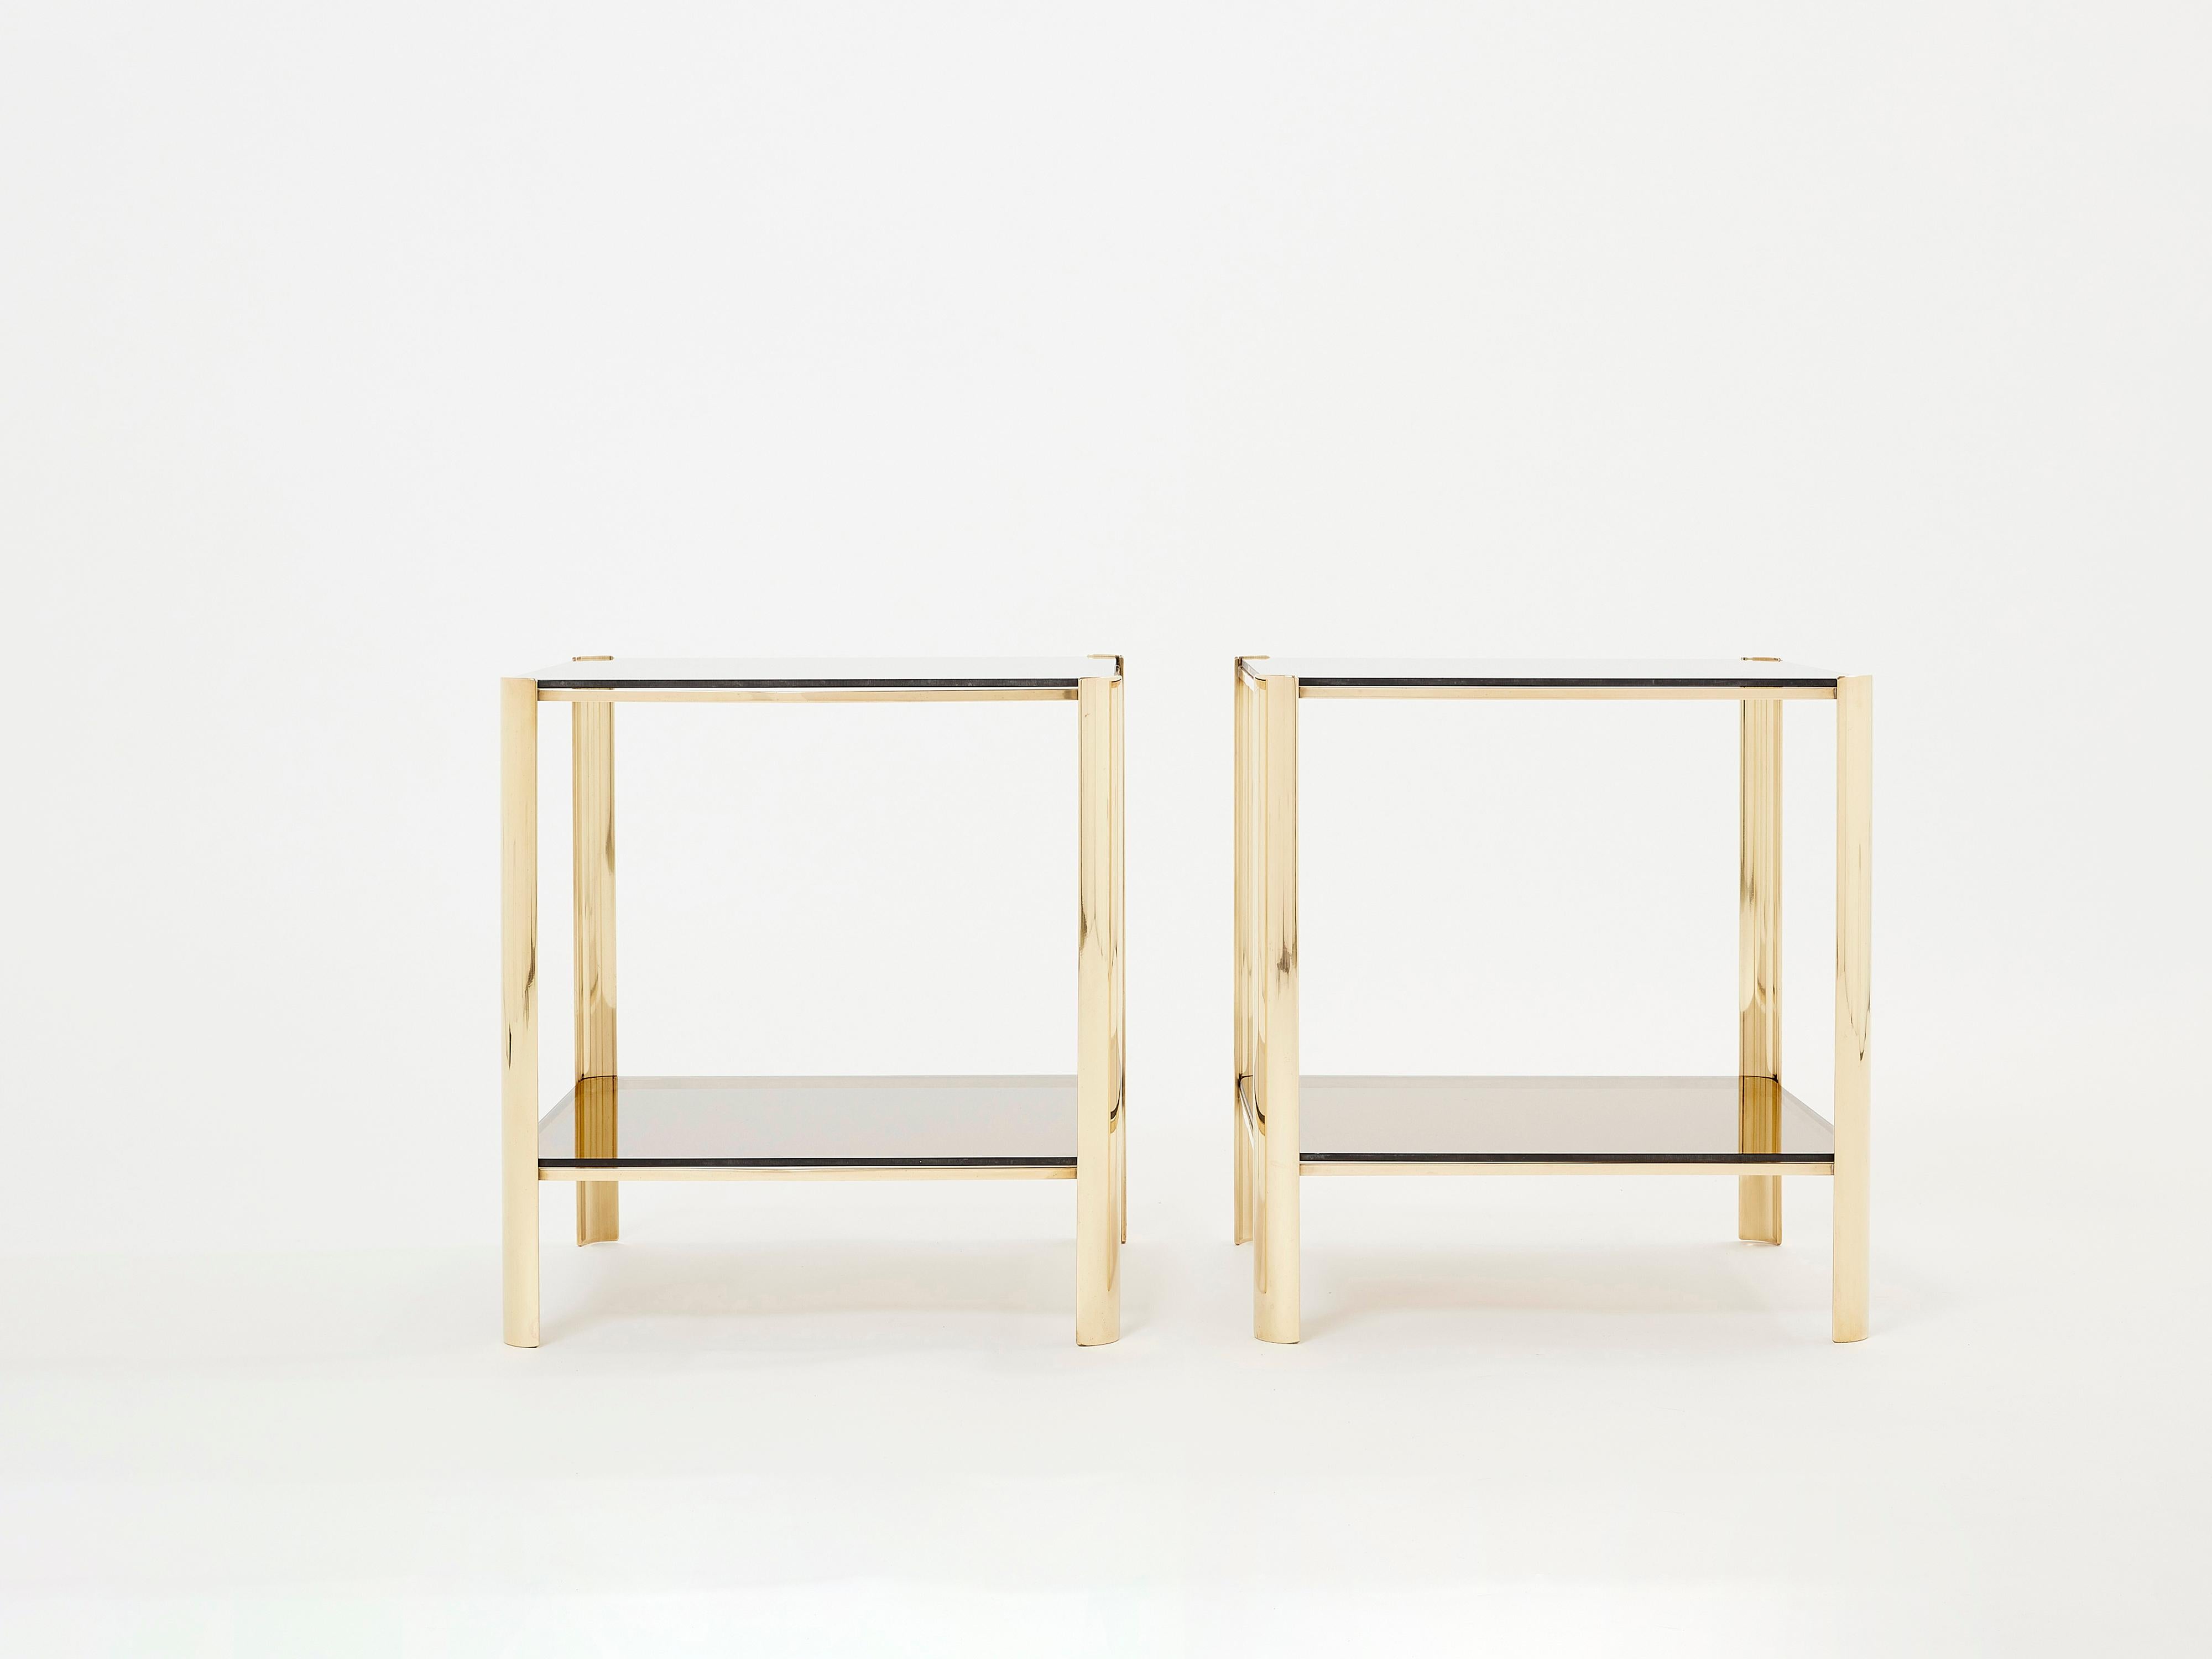 Pair of Two-Tier Bronze End Tables by Jacques Quinet for Broncz, 1960s For Sale 4